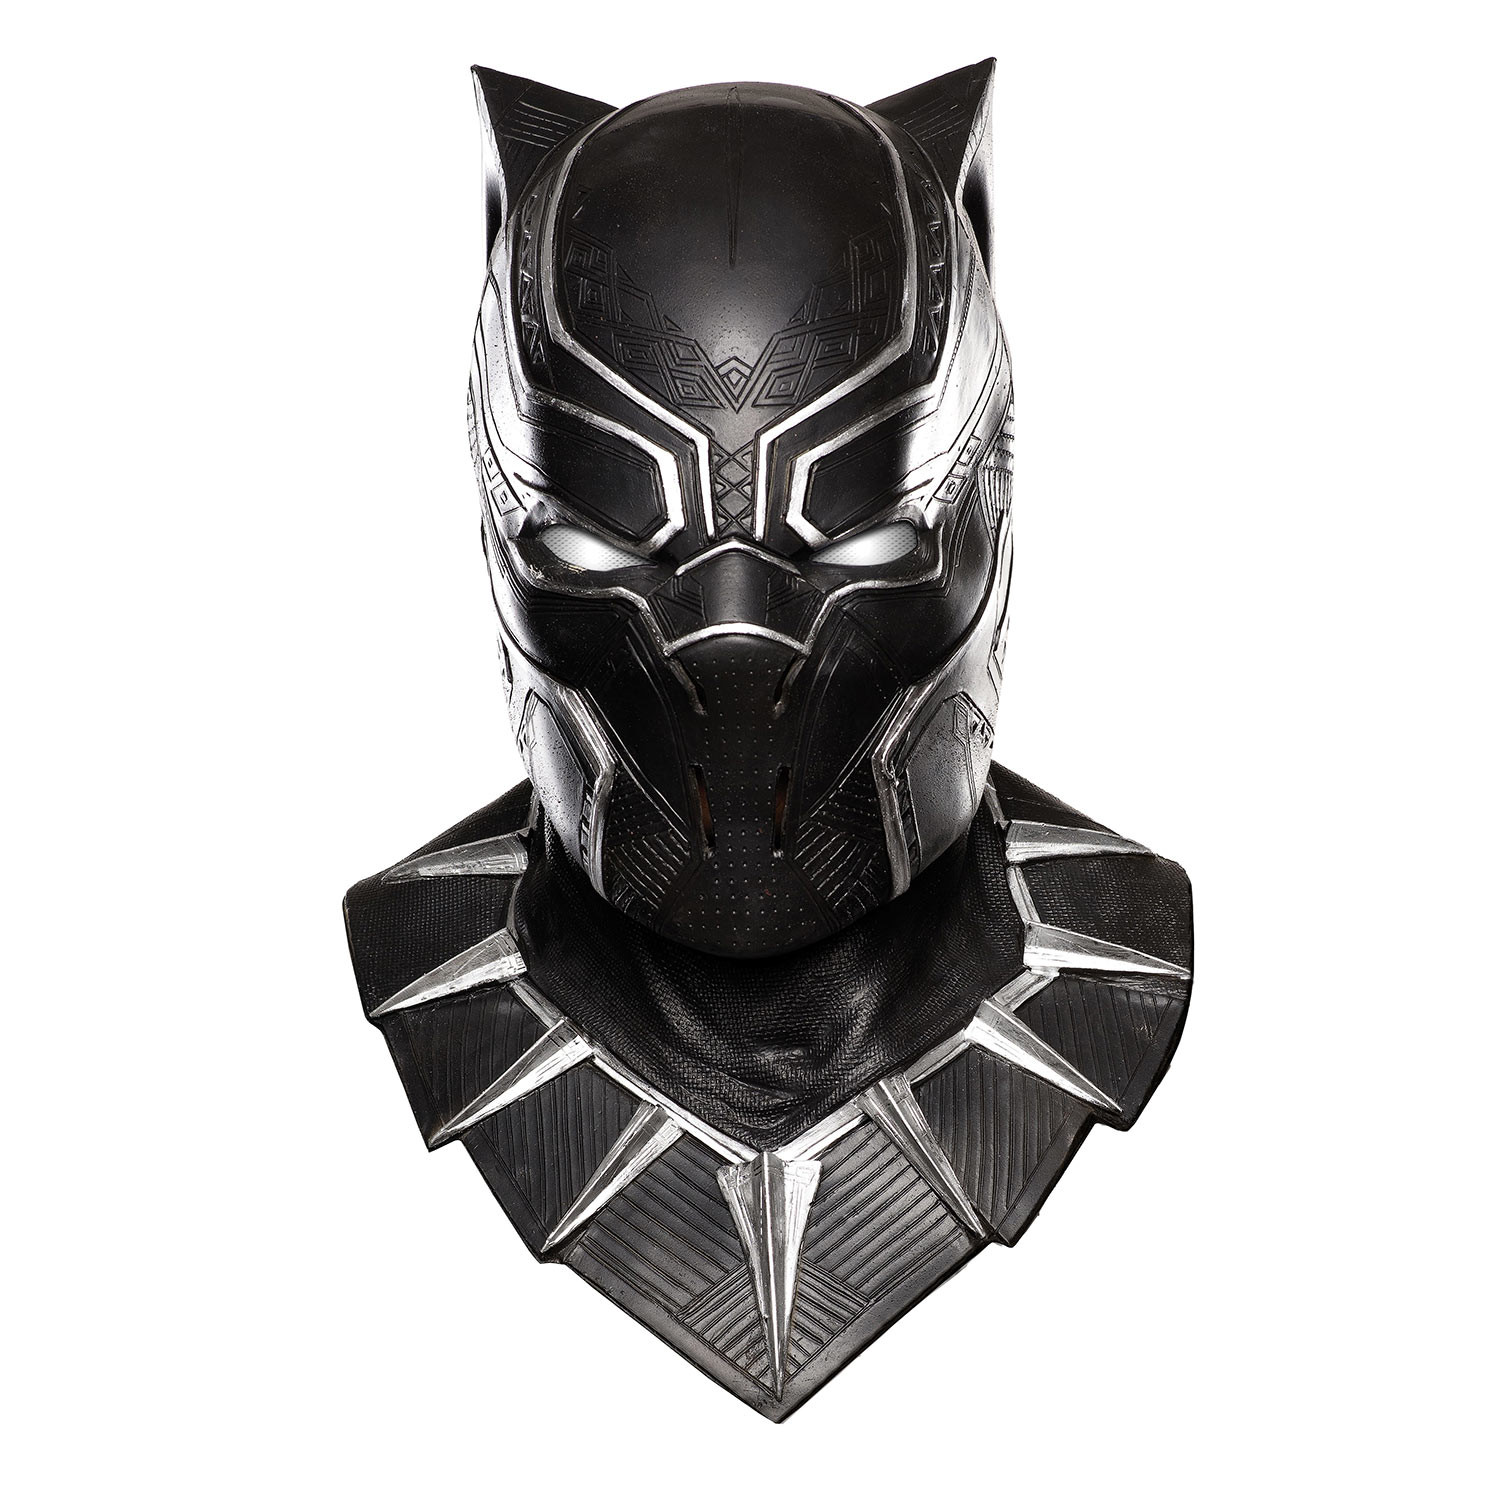 Monument Stadion Selv tak Black Panther Deluxe Overhead Latex Costume Mask